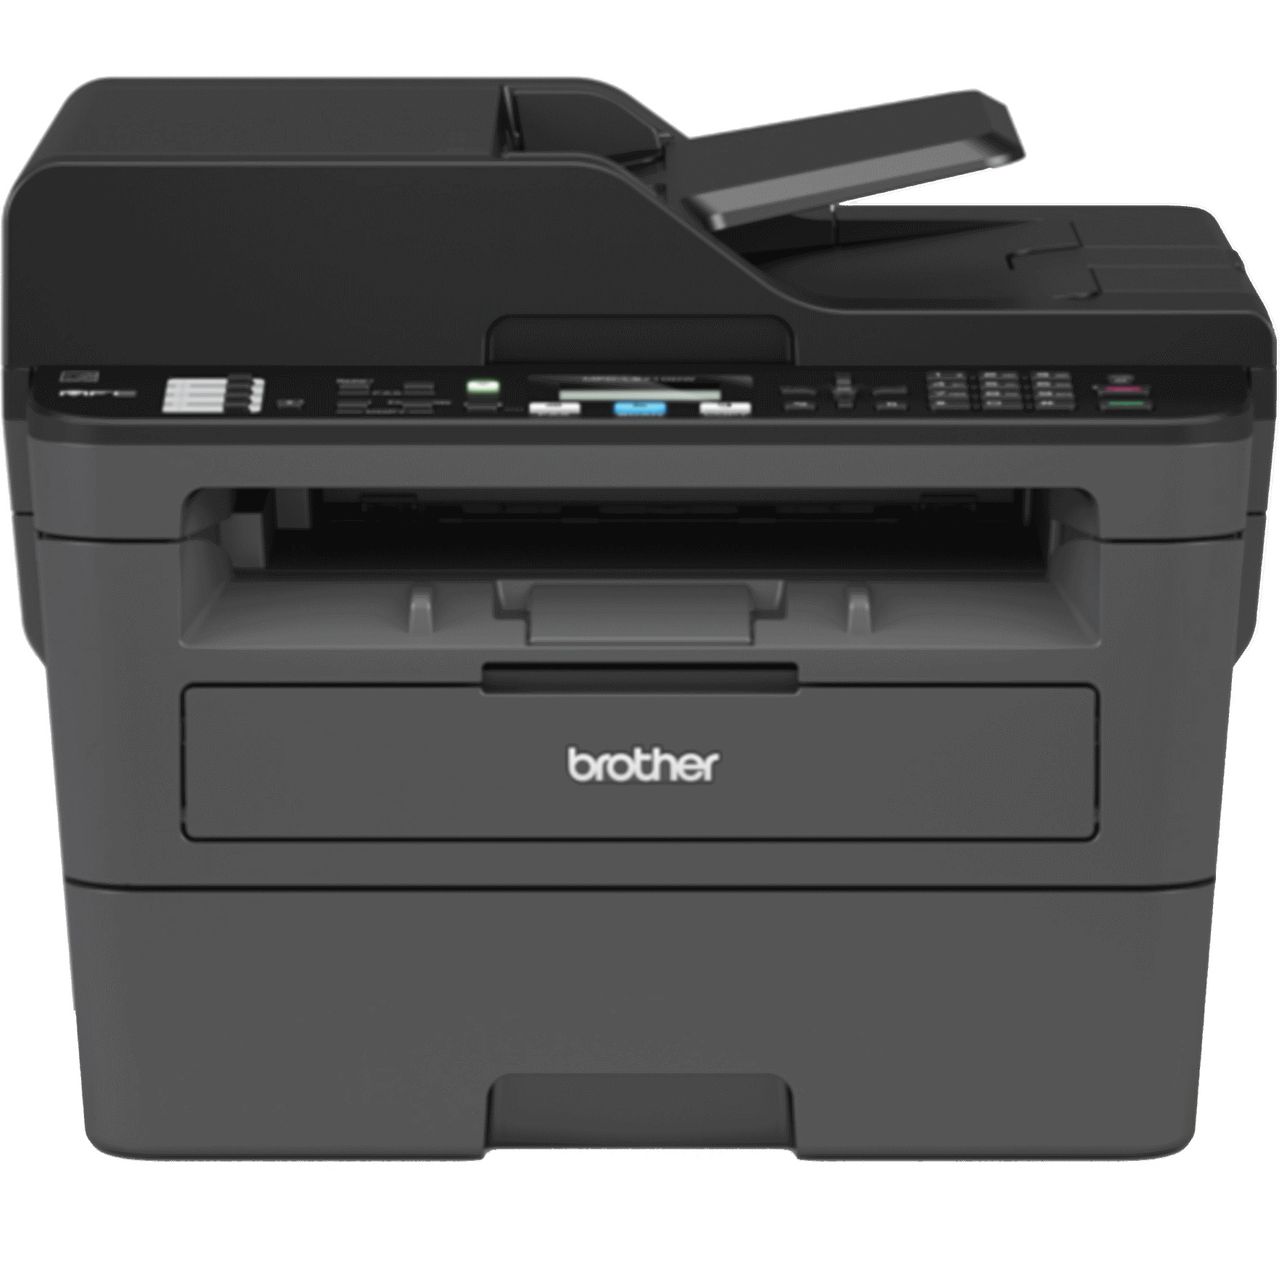 Brother MFC-L2710DW Laser Printer Review